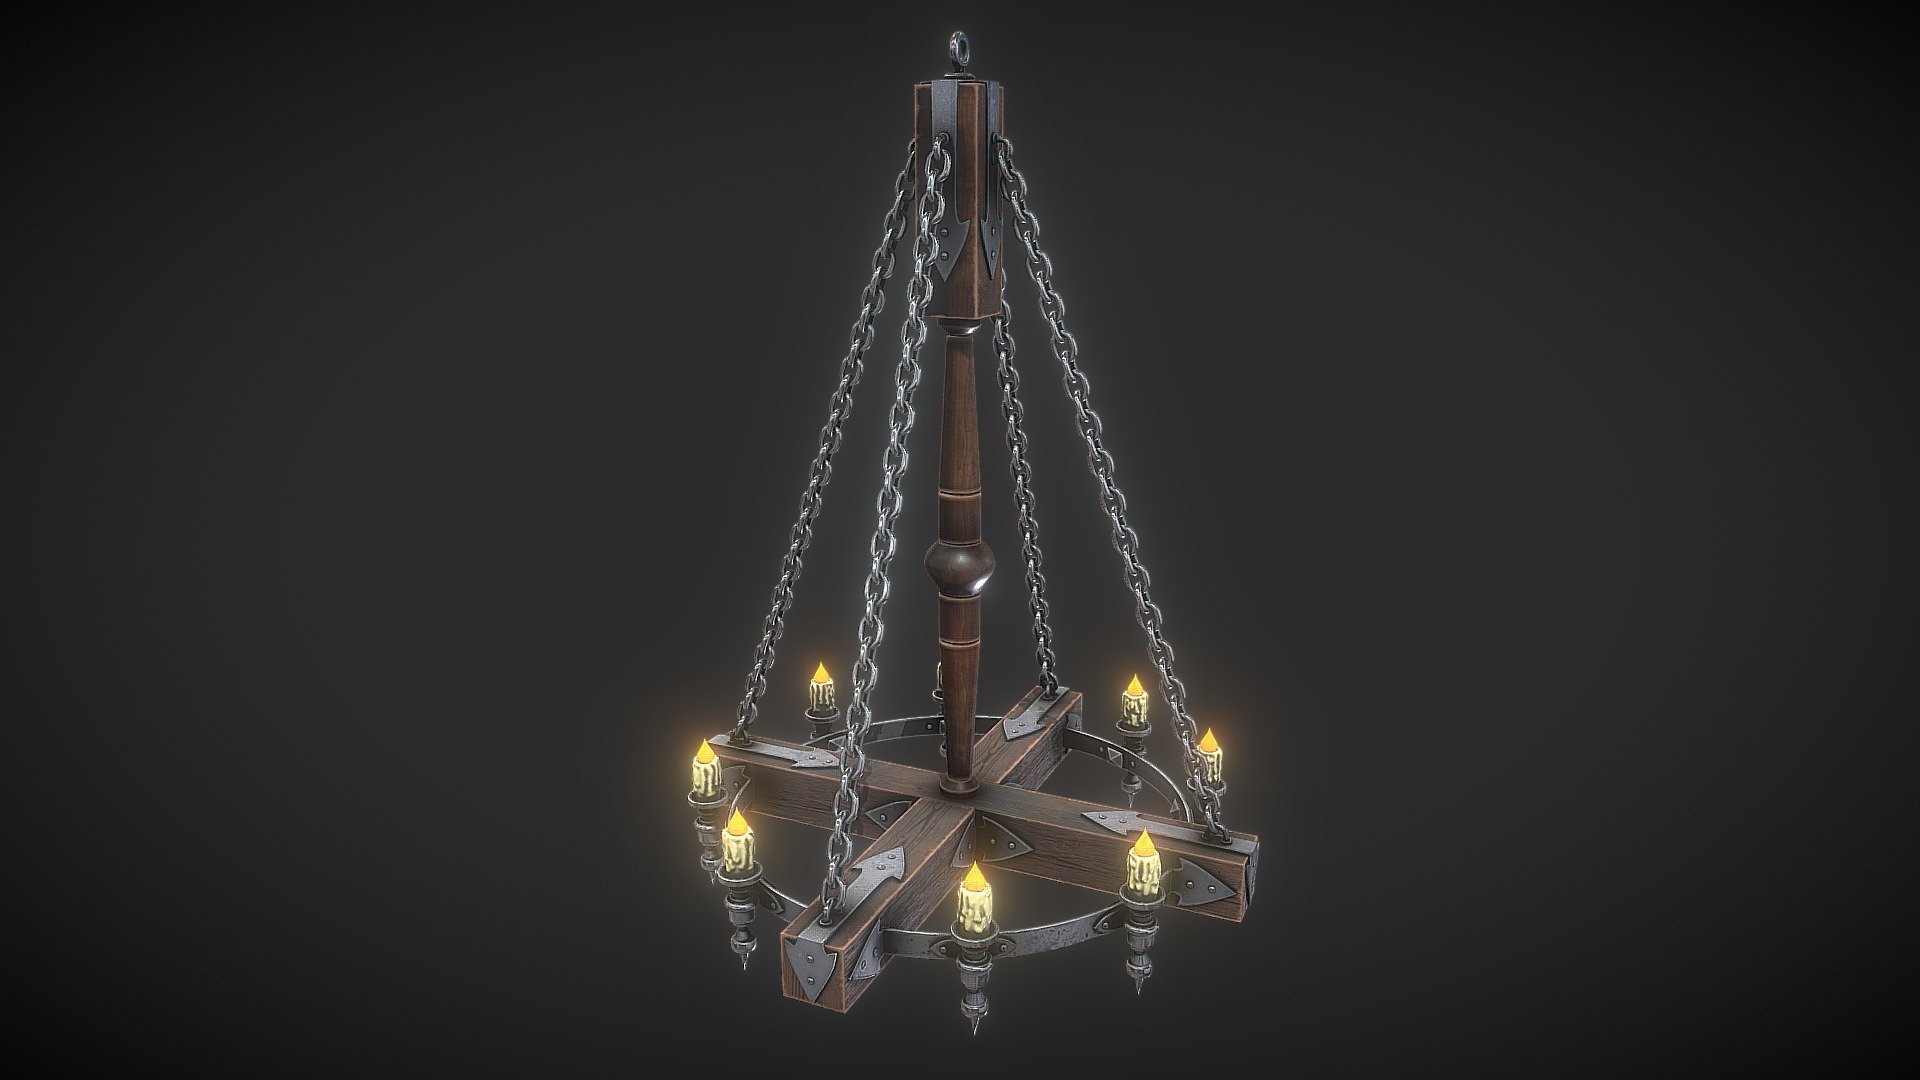 Hello. This is a high definition quality polygon of a Forged_chandelier_1 3D Model with PBR textures. Extremely detailed and realistic. Suitable for movie prop, architectural visualizations, advertising renders and other. The archive includes Obj and FBX, Marmoset scene, textures for the Unity: Base color, Height, Metallic, Mixed AO, Normal_OpenGL, Roughness. And also included in the archive textures for UE: BaseColor, Normal, OcclusionRoughnessMetallic. All textures are 4k resolution. The number of materials corresponds to the number of main objects in the scene. The model contains 2 object: Forged_chandelier_1, Forged_chandelier_1_lights. If you need, we will make a file of this model for 3D printing especially for you 3d model